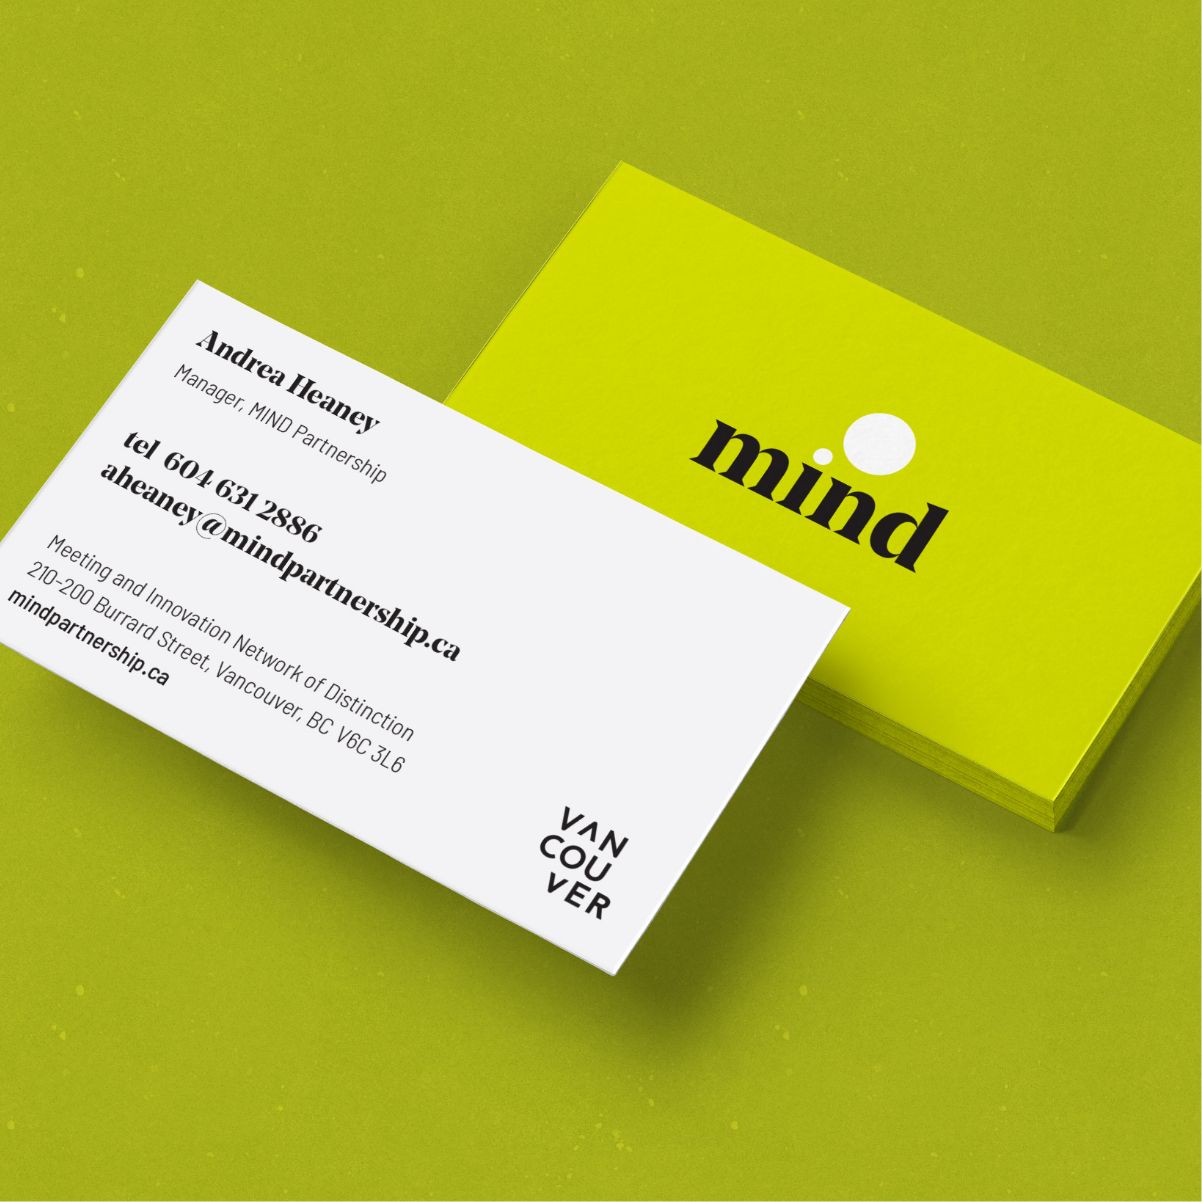 MIND Meeting & Innovation Network of Distinction Business Cards